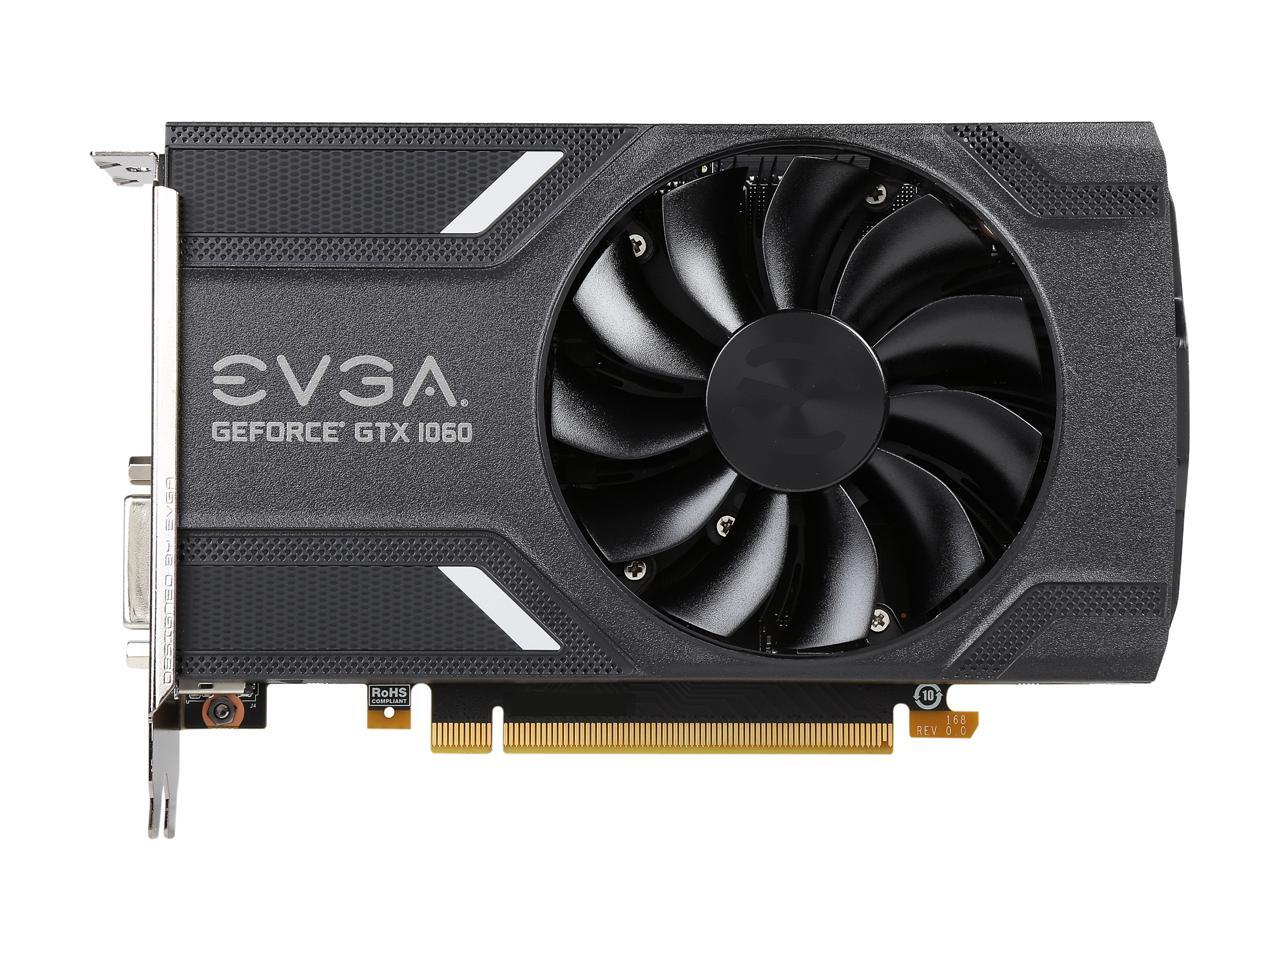 Evga Geforce Gtx 1060 Gaming, Acx 2.0 (Single Fan), 06G-P4-6161-Kr, 6Gb Gddr5, Dx12 Osd Support (Pxoc), Only 6.8 Inches